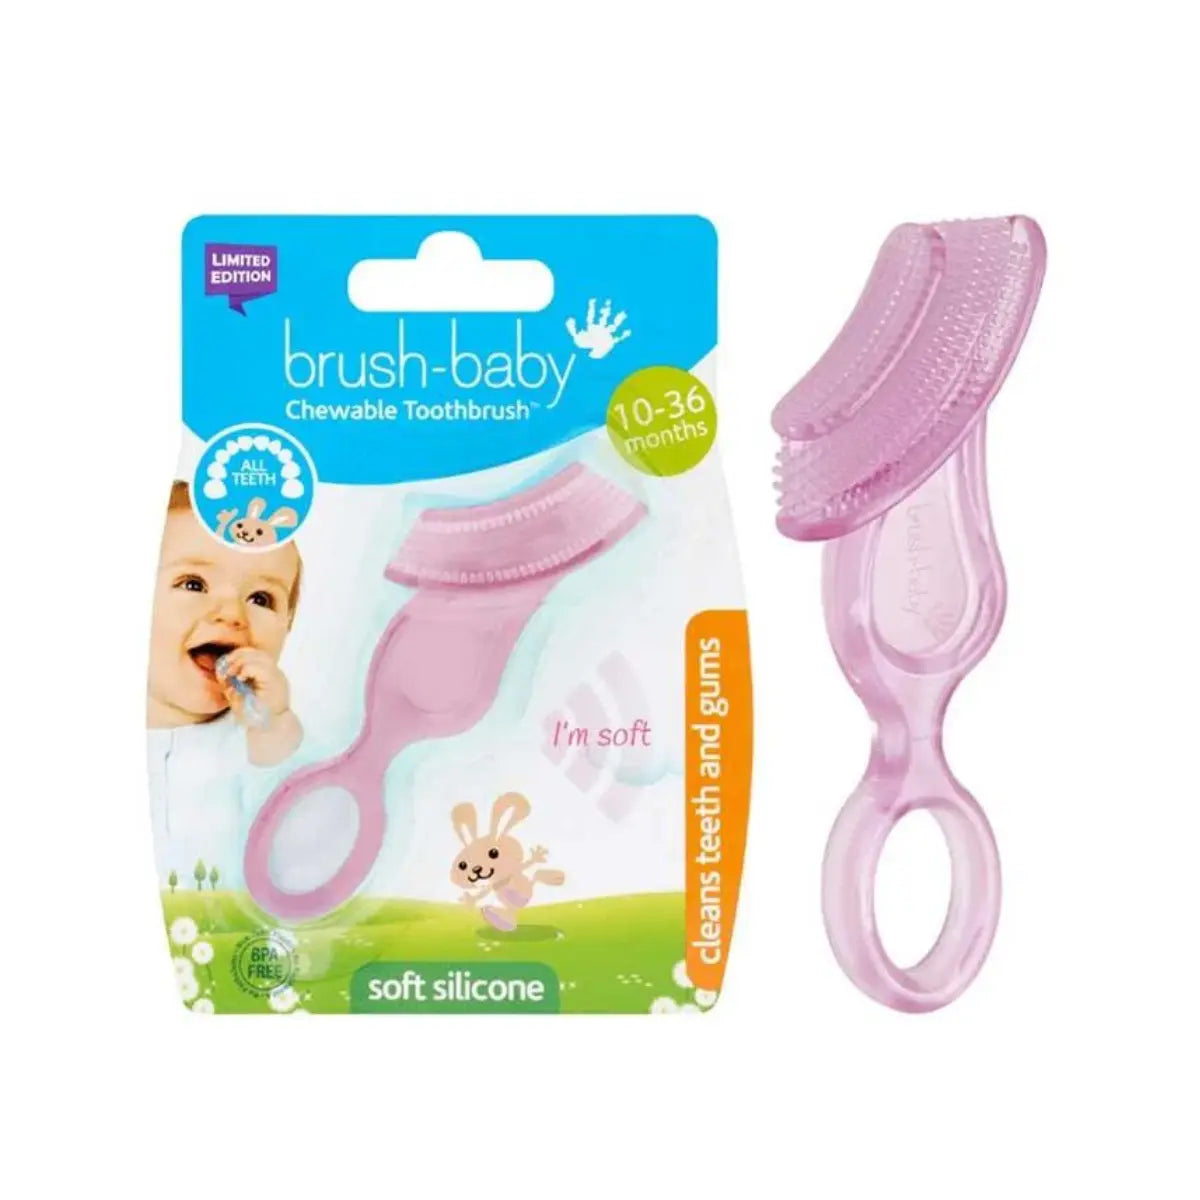 Pink Chewable first baby toothbrush and baby teether